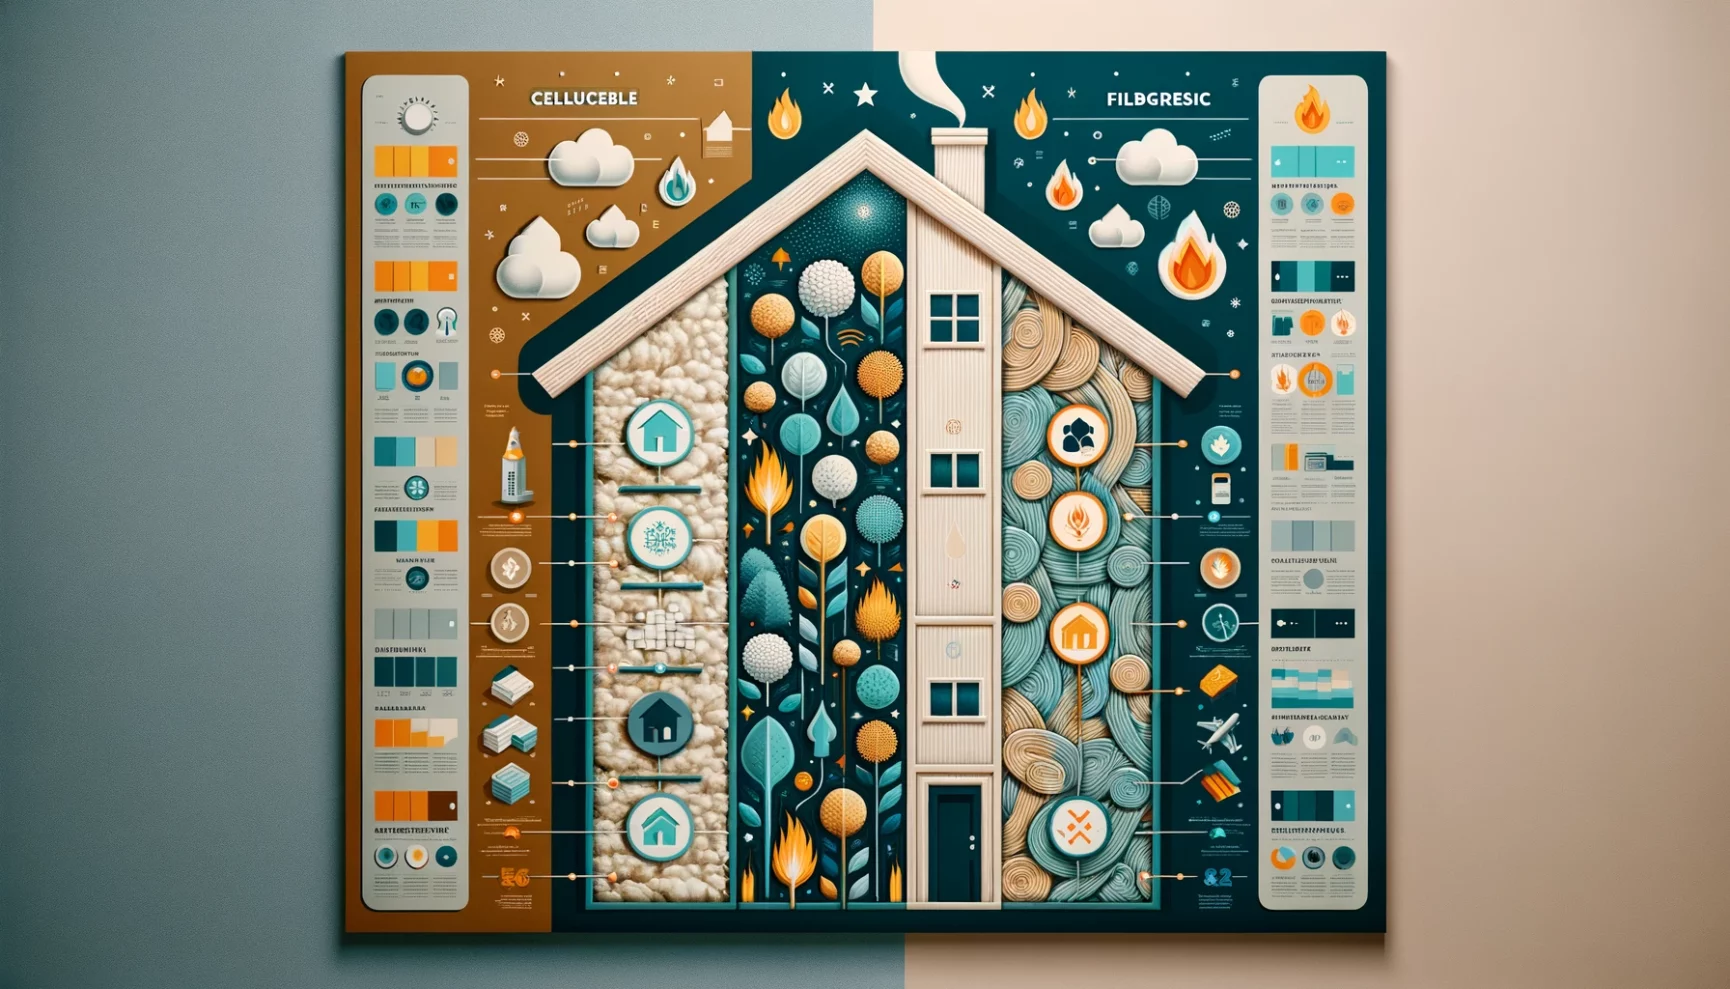 An infographic poster presenting weather-related data and symbols in a creative, building-shaped layout.